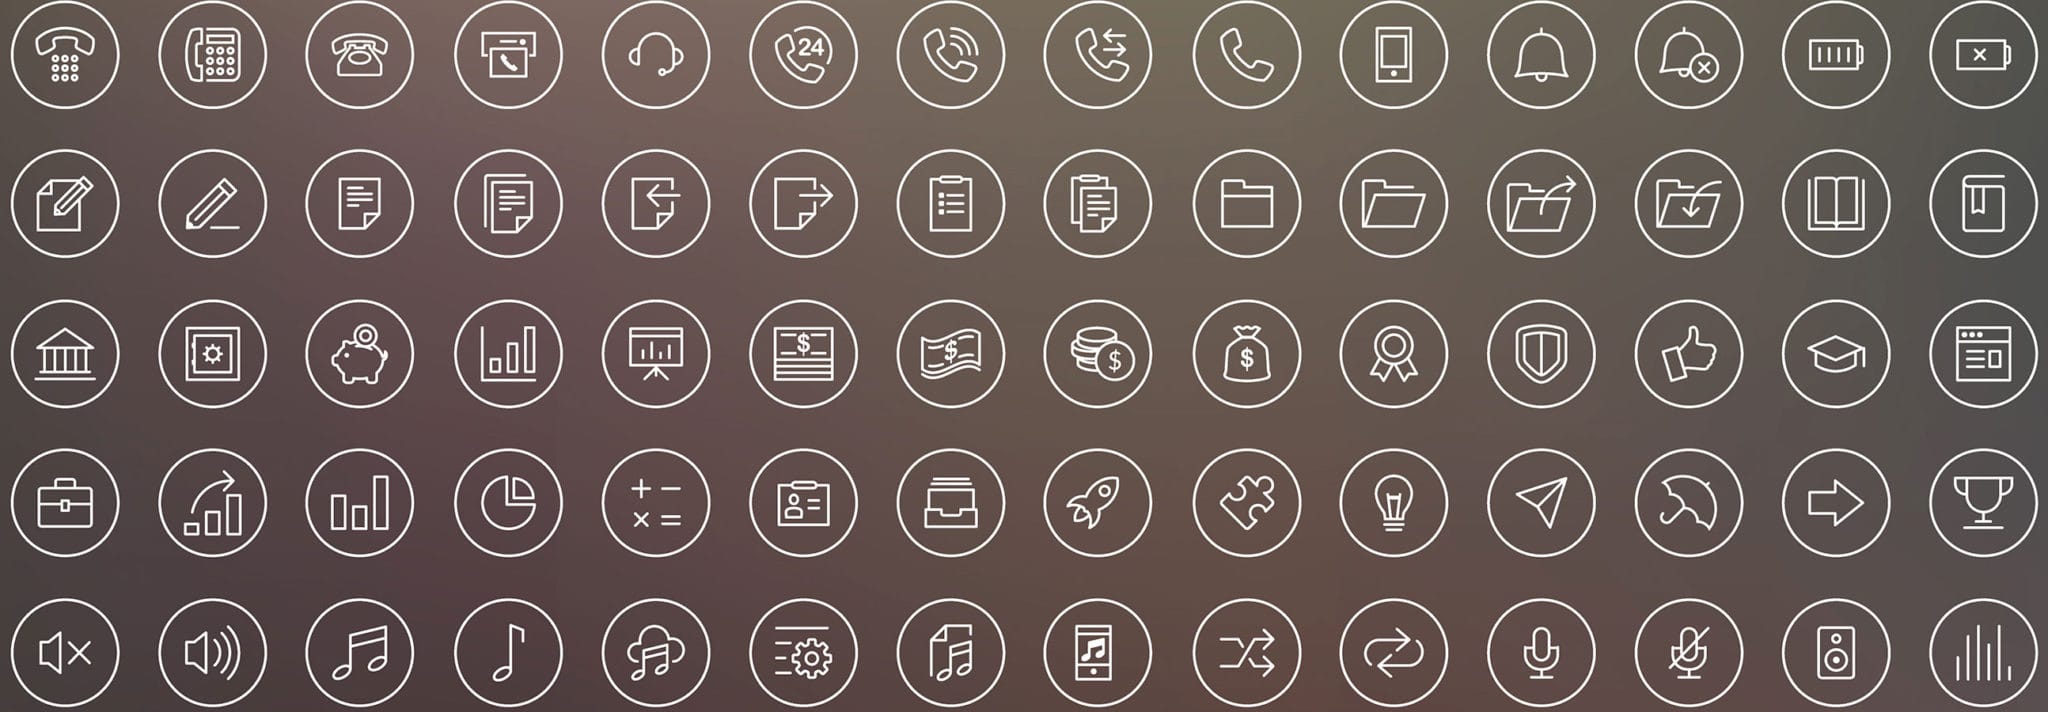 Why Icons Are Great For Your Website